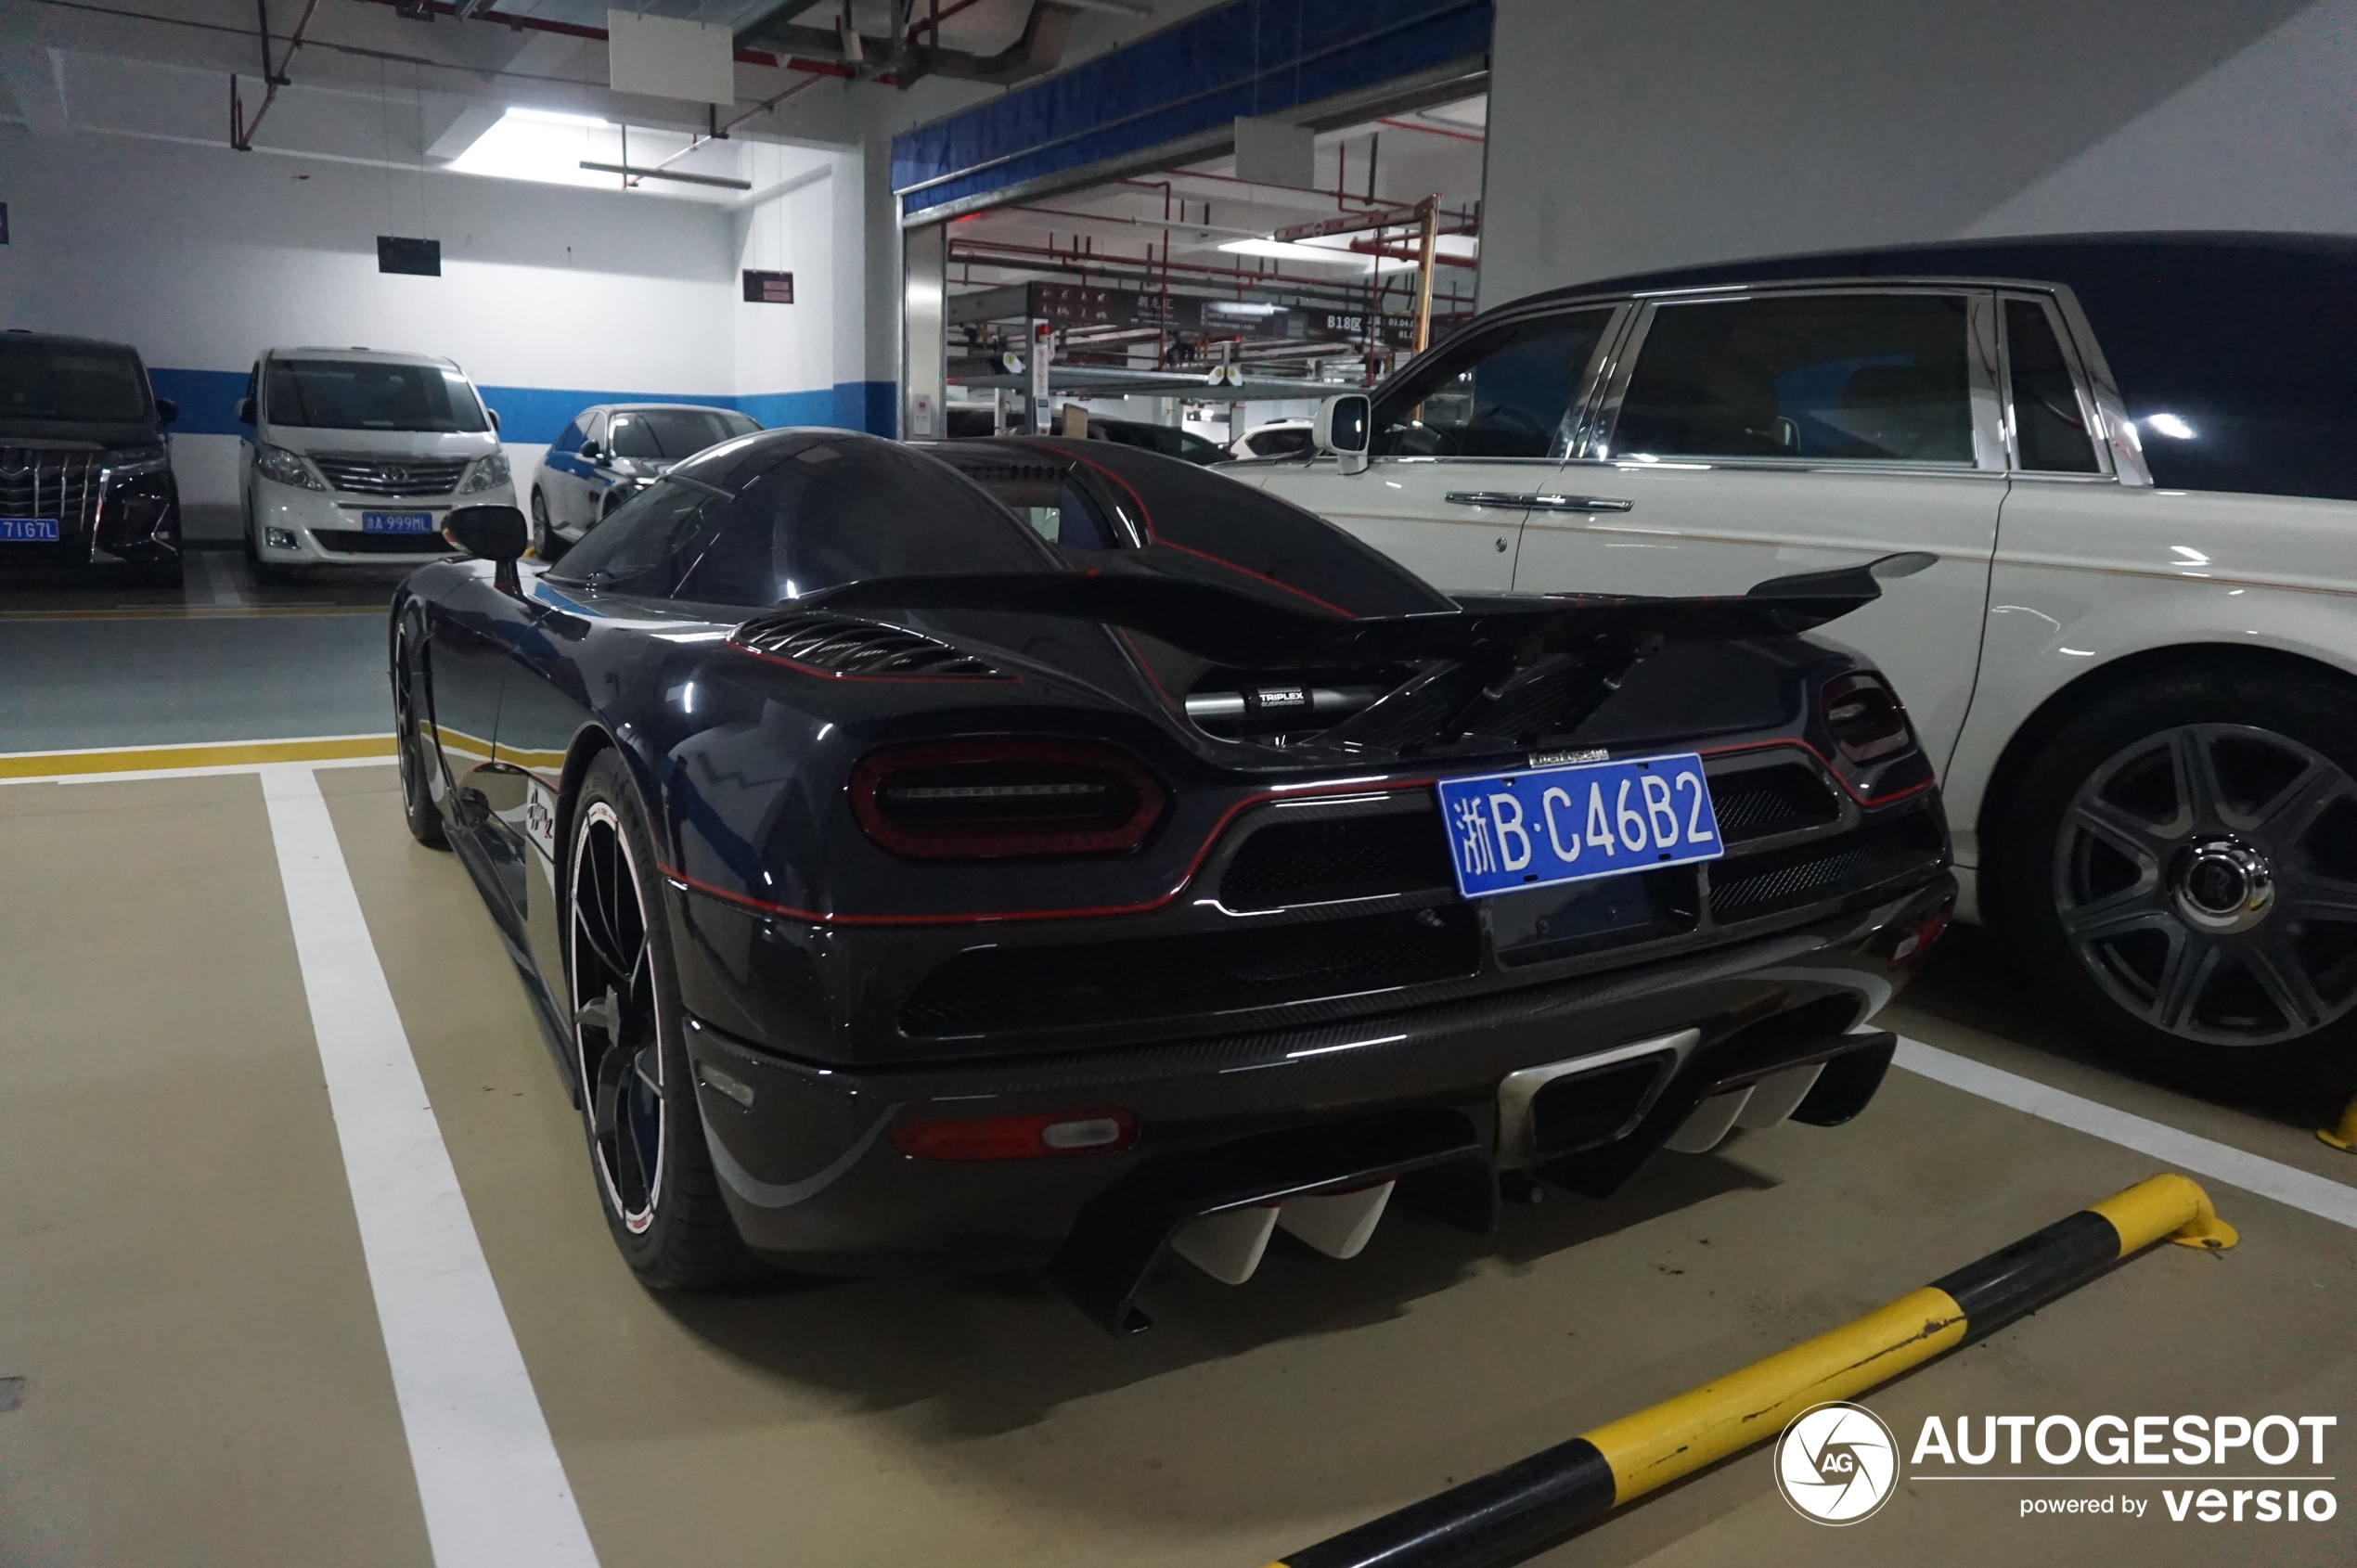 For the first time ever, we lay eyes on the Koenigsegg Agera R BLT.